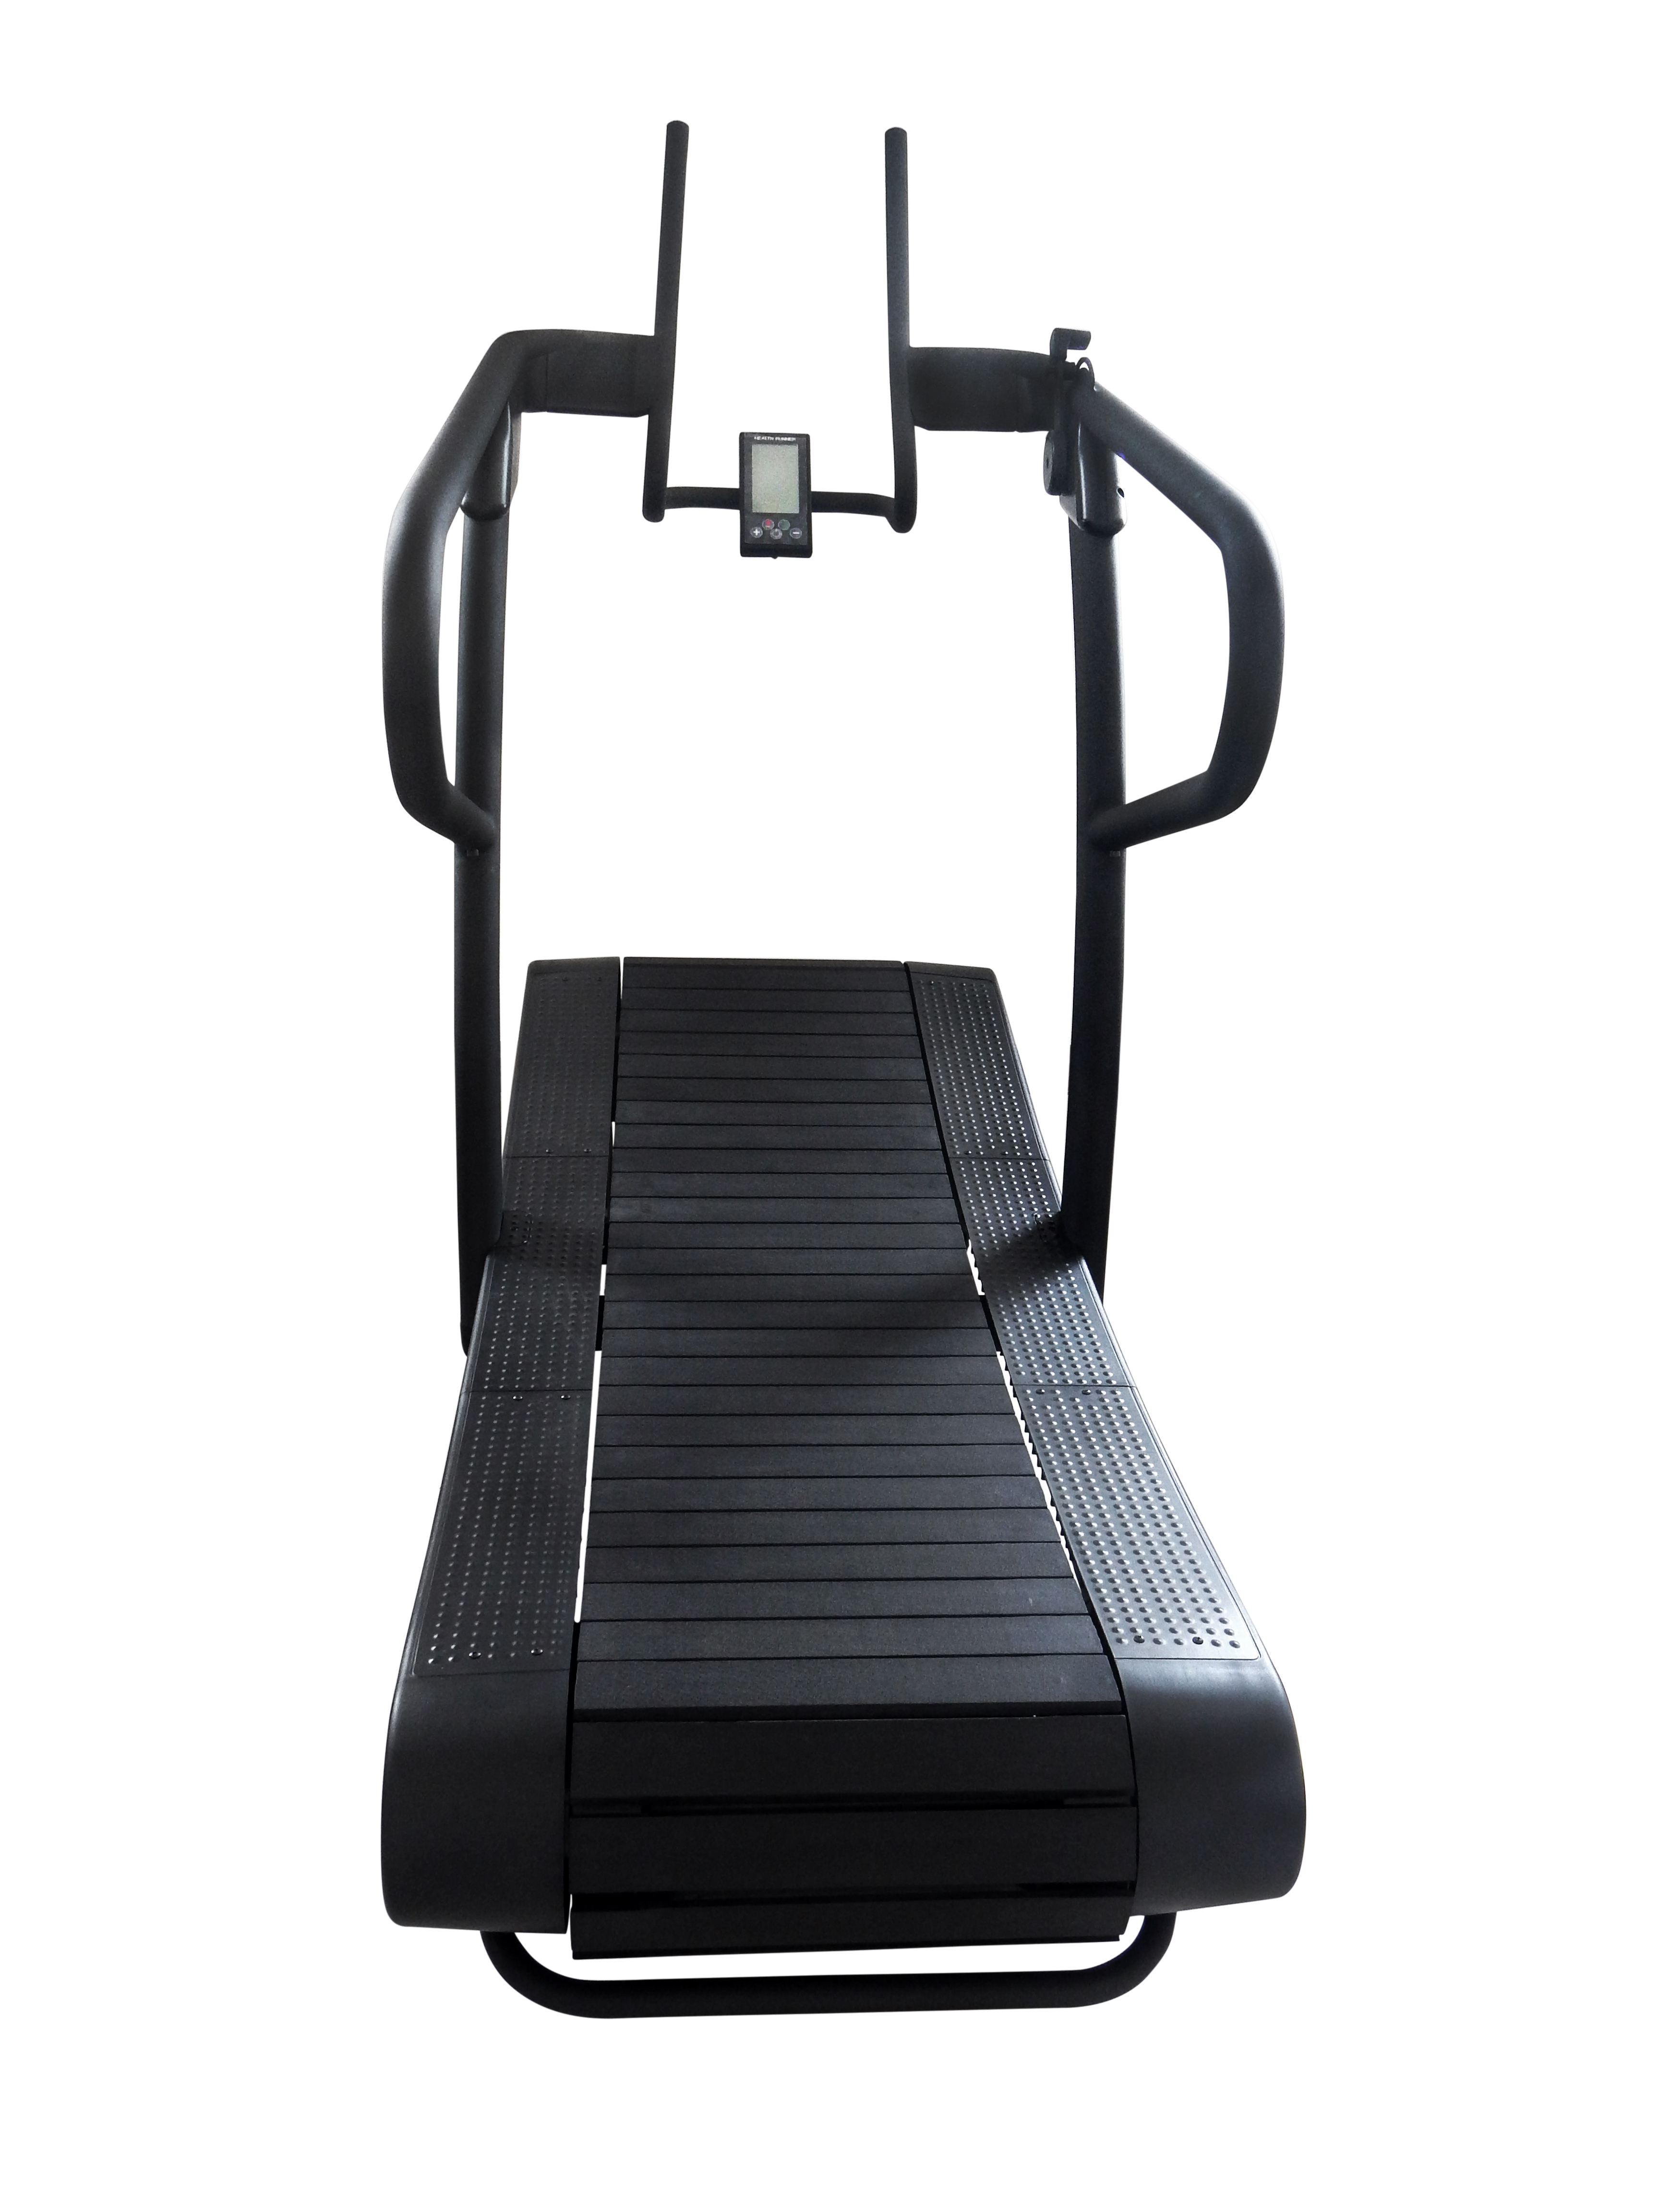 Self Powered Magnetic Community Resistance Curved Treadmill